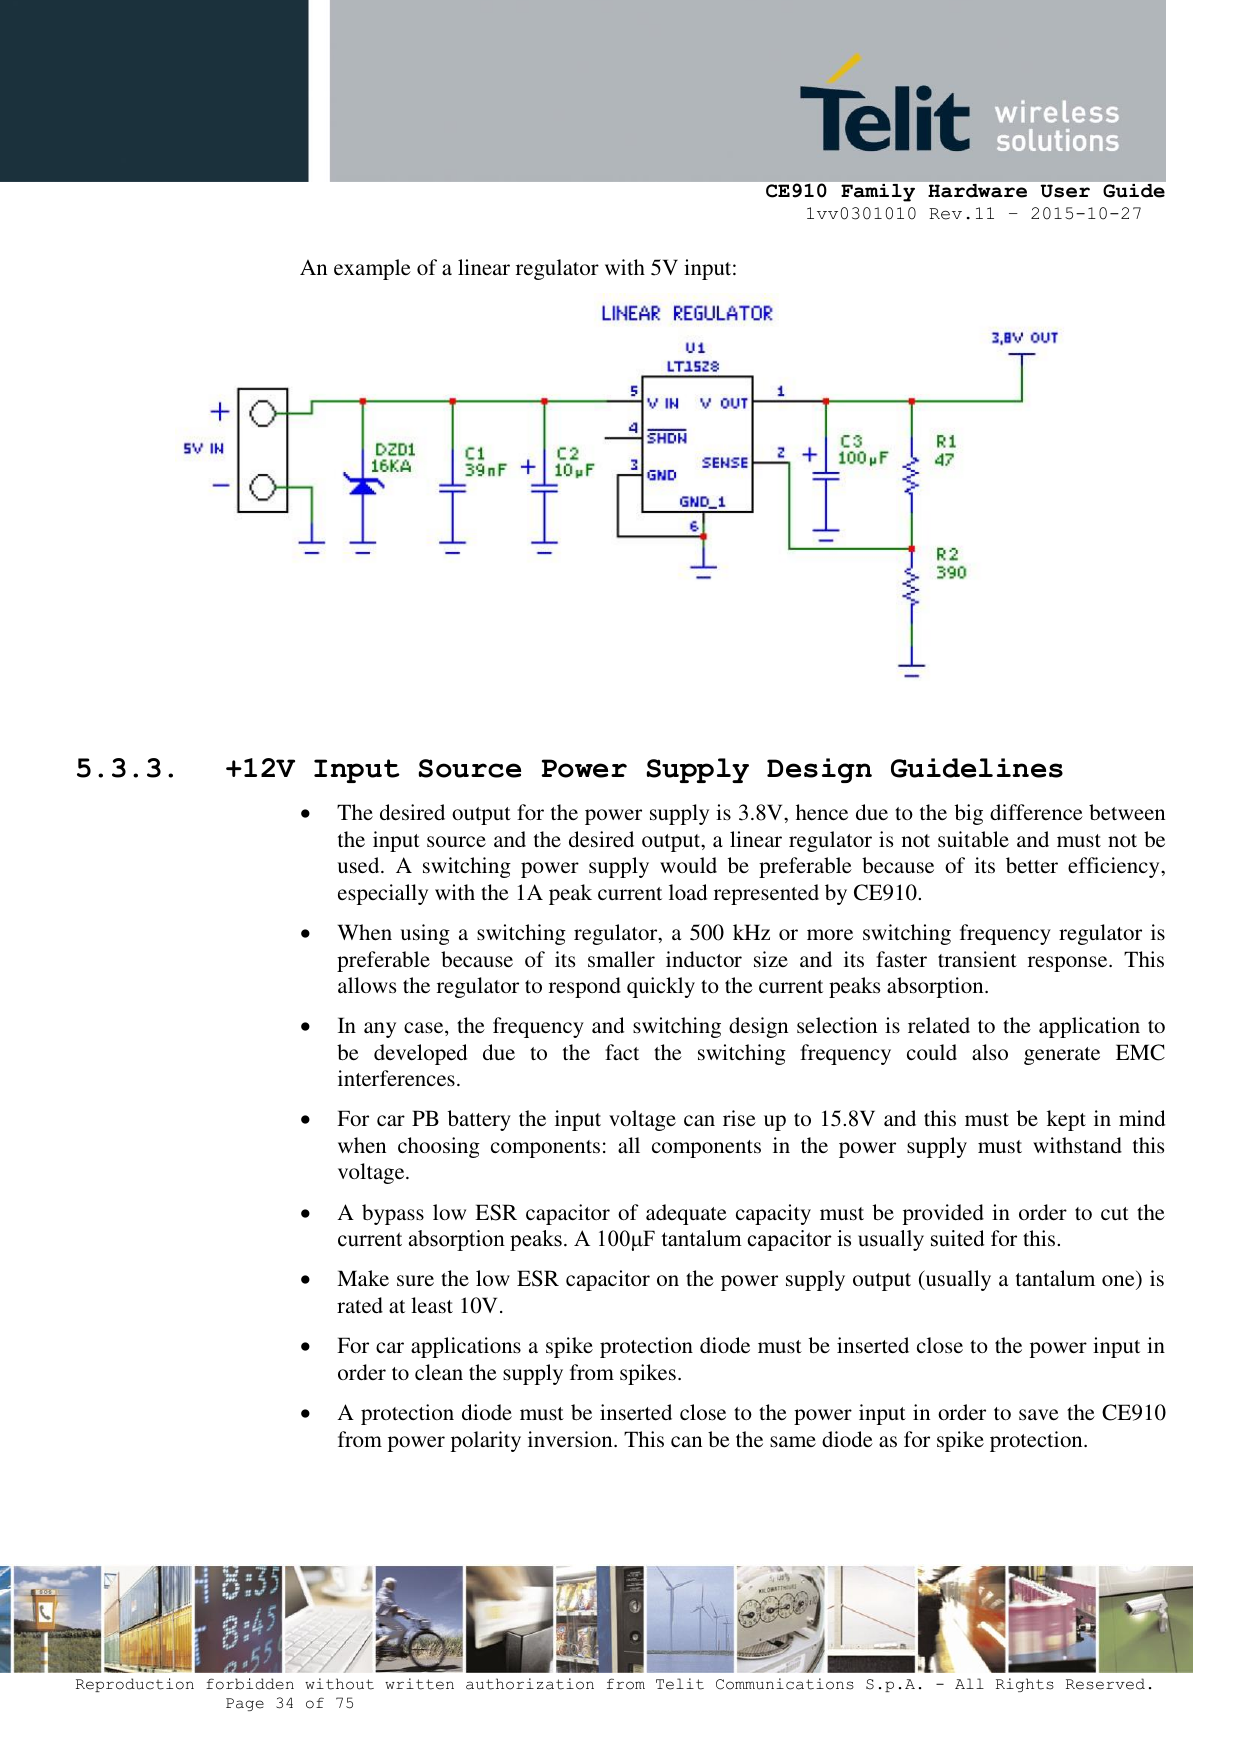     CE910 Family Hardware User Guide 1vv0301010 Rev.11 – 2015-10-27 Reproduction forbidden without written authorization from Telit Communications S.p.A. - All Rights Reserved.    Page 34 of 75                                                     An example of a linear regulator with 5V input:   5.3.3. +12V Input Source Power Supply Design Guidelines  The desired output for the power supply is 3.8V, hence due to the big difference between the input source and the desired output, a linear regulator is not suitable and must not be used.  A  switching  power  supply  would  be  preferable  because  of  its  better  efficiency, especially with the 1A peak current load represented by CE910.  When using a switching regulator, a 500 kHz or more switching frequency regulator is preferable  because  of  its  smaller  inductor  size  and  its  faster  transient  response.  This allows the regulator to respond quickly to the current peaks absorption.   In any case, the frequency and switching design selection is related to the application to be  developed  due  to  the  fact  the  switching  frequency  could  also  generate  EMC interferences.  For car PB battery the input voltage can rise up to 15.8V and this must be kept in mind when  choosing  components:  all  components  in  the  power  supply  must  withstand  this voltage.  A bypass low ESR capacitor of adequate capacity must be provided in order to cut the current absorption peaks. A 100μF tantalum capacitor is usually suited for this.  Make sure the low ESR capacitor on the power supply output (usually a tantalum one) is rated at least 10V.  For car applications a spike protection diode must be inserted close to the power input in order to clean the supply from spikes.   A protection diode must be inserted close to the power input in order to save the CE910 from power polarity inversion. This can be the same diode as for spike protection.   